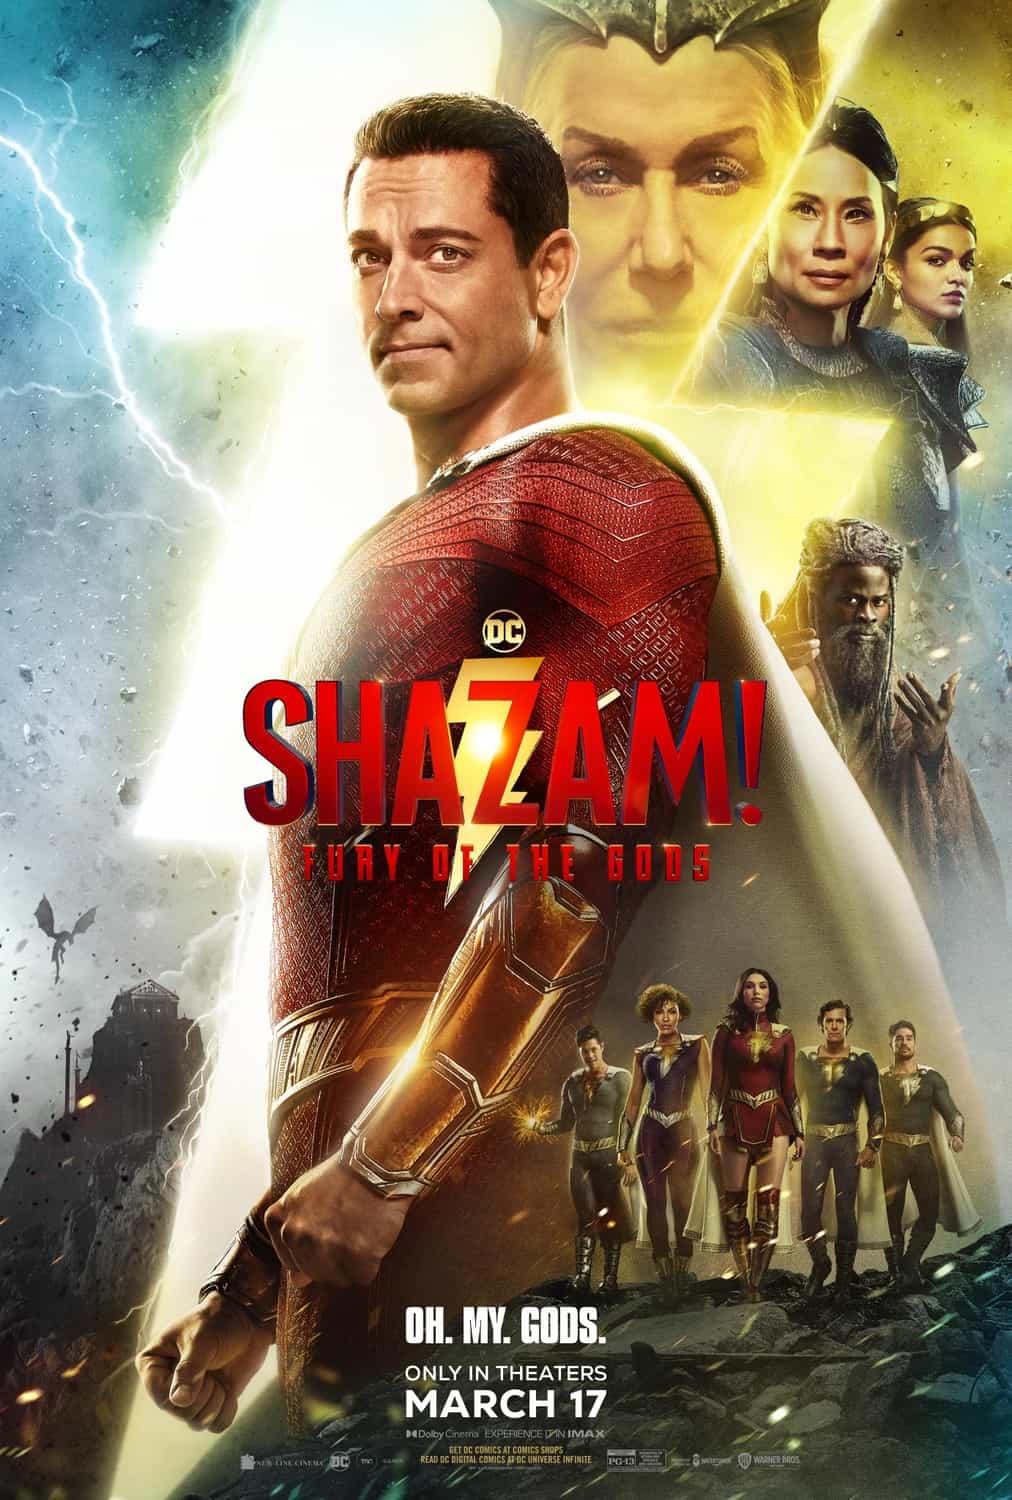 A new trailer is out for Shazam! Fury of the Gods starring Zachary Levi - movie UK release date 17th March 2023 #shazamfuryofthegods